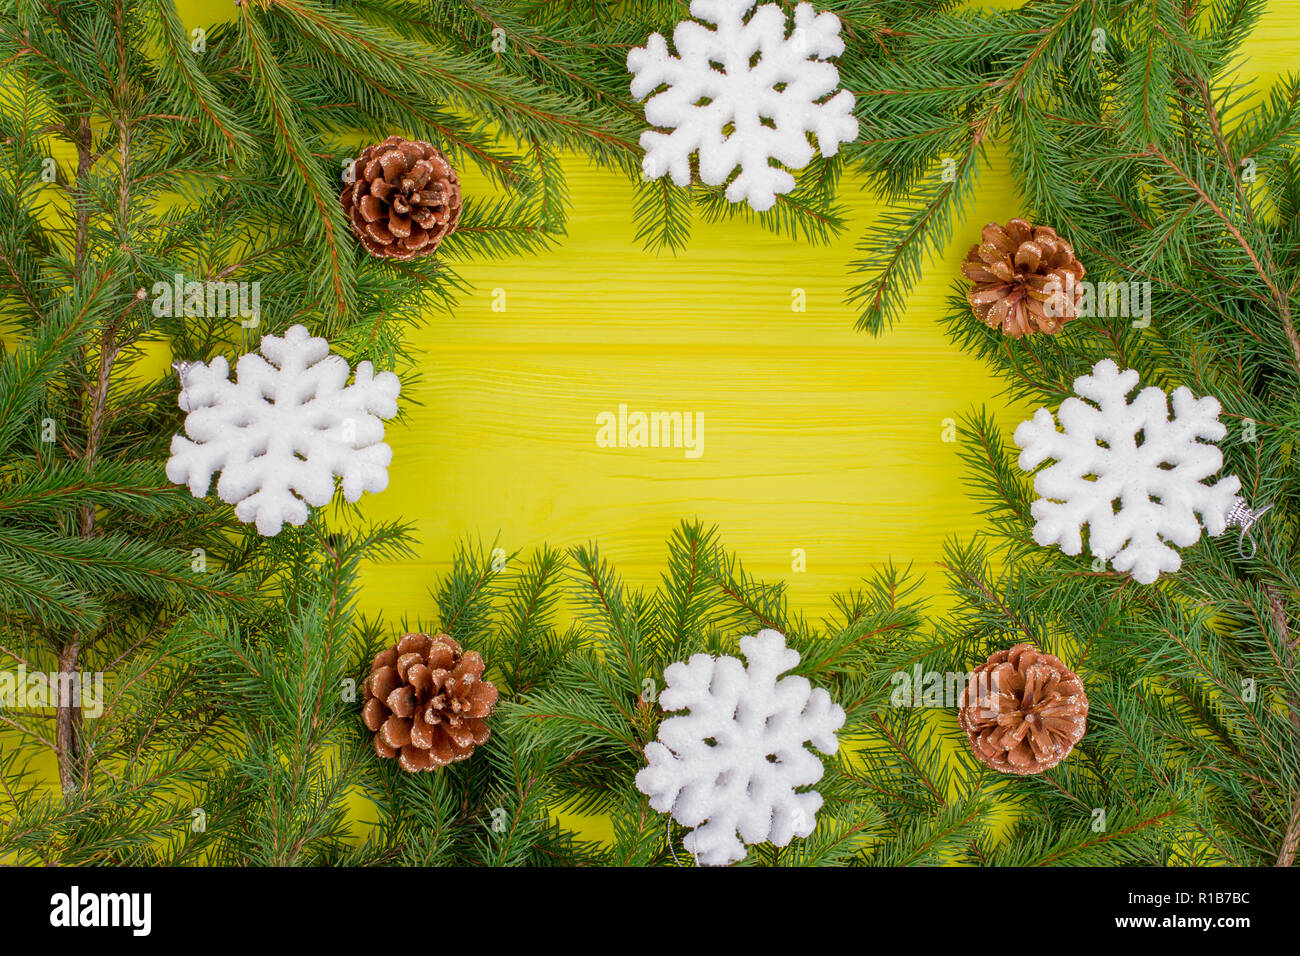 Christmas and New Year border from fir branches. Stock Photo